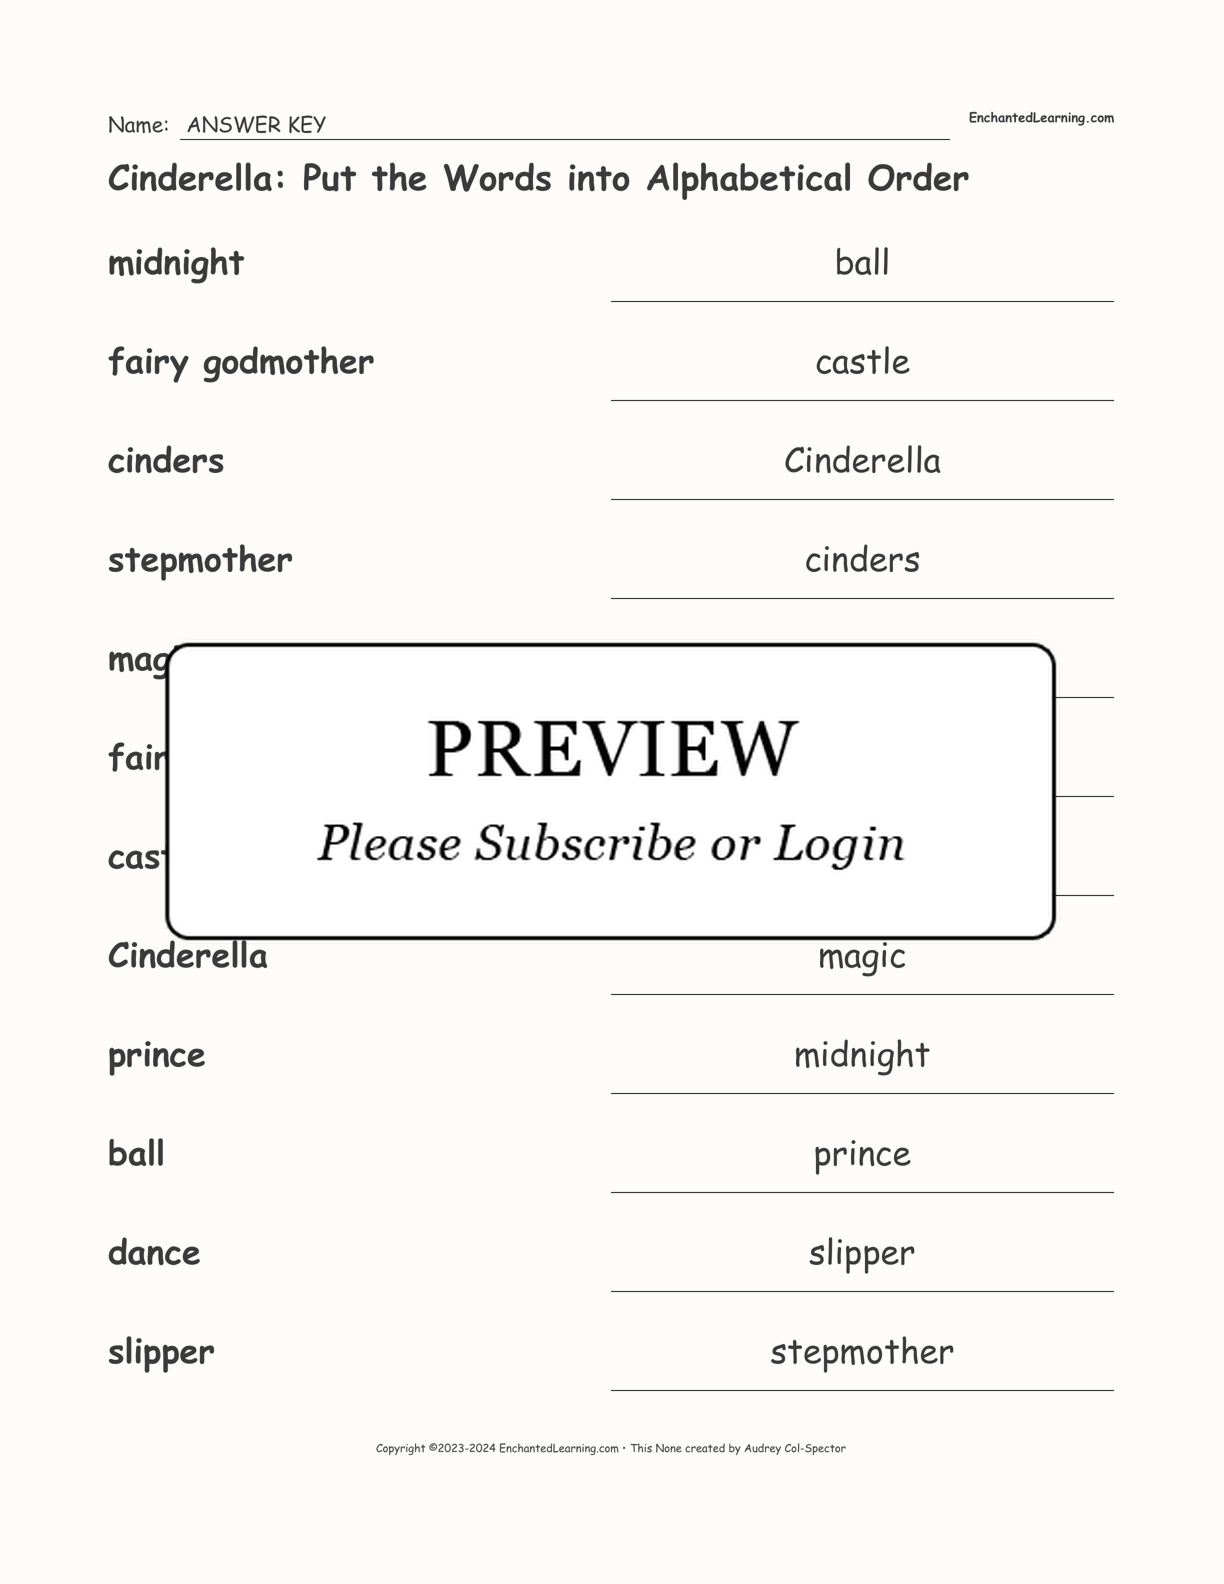 Cinderella: Put the Words into Alphabetical Order interactive worksheet page 2